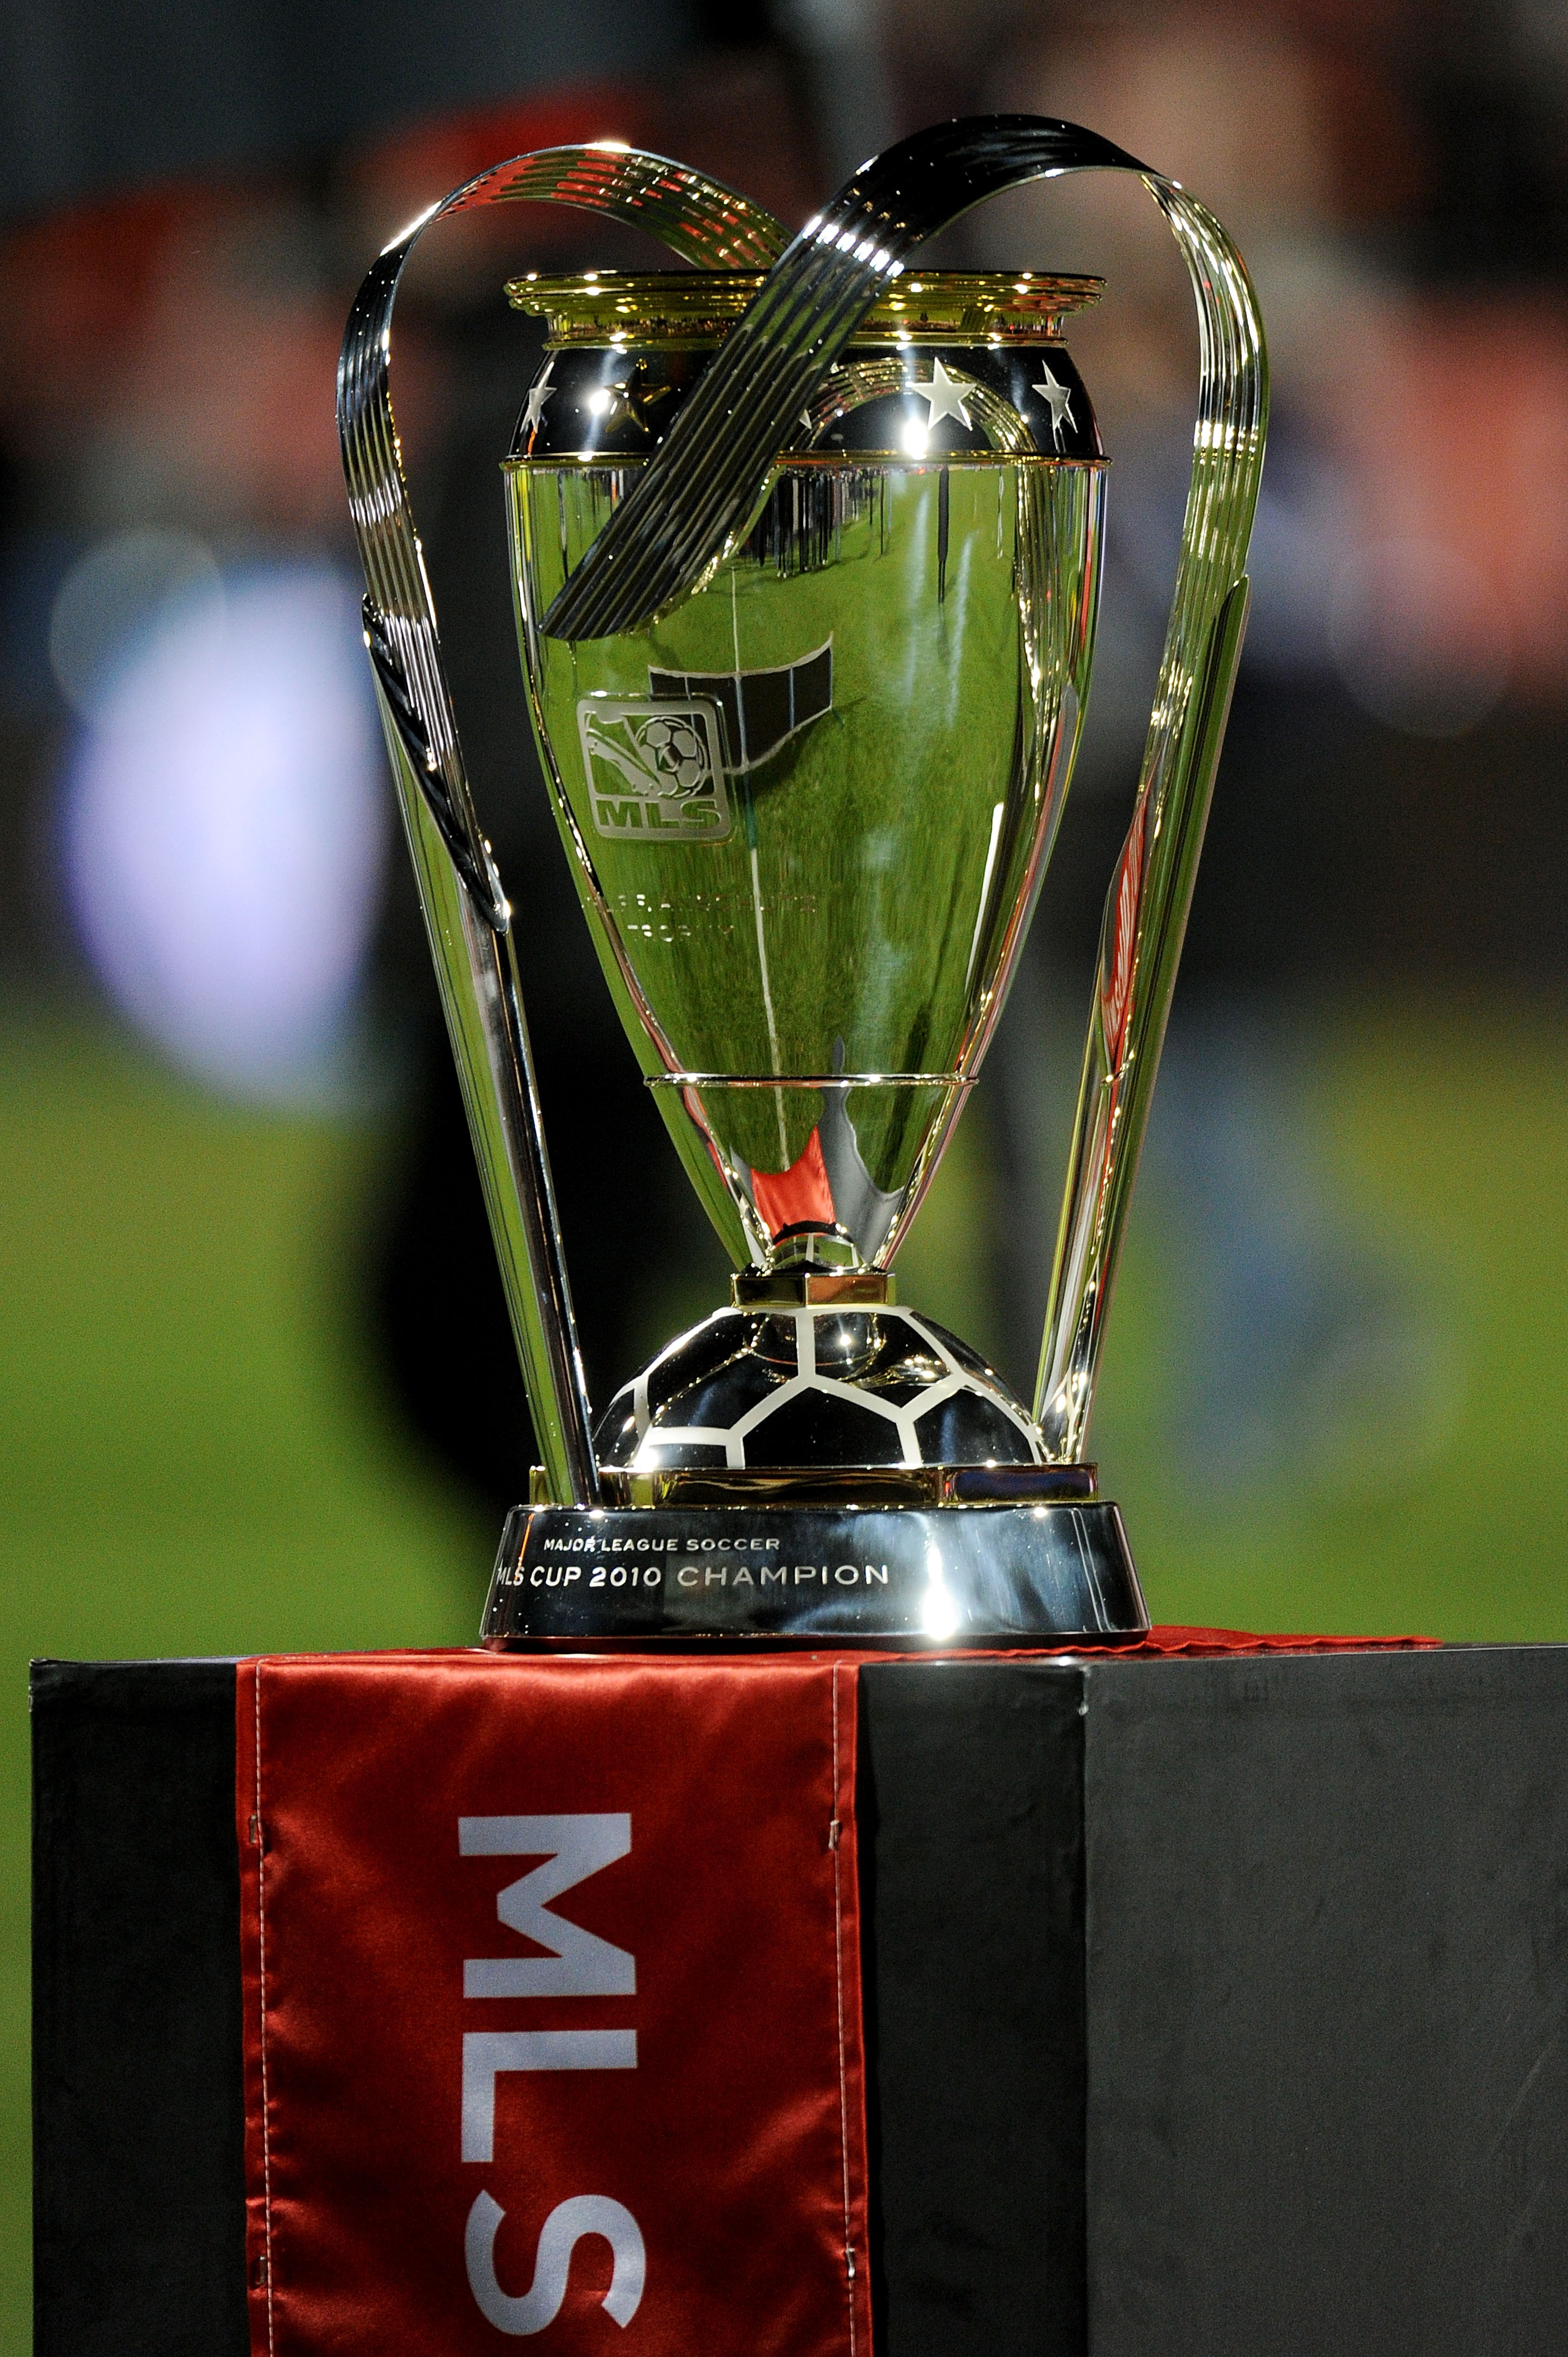 TORONTO, ON - NOVEMBER 21:  The Philip F. Anschutz Trophy is seen after the Colorado Rapids defeated FC Dallas 2-1 in overtime of the 2010 MLS Cup match at BMO Field on November 21, 2010 in Toronto, Canada.  (Photo by Harry How/Getty Images)